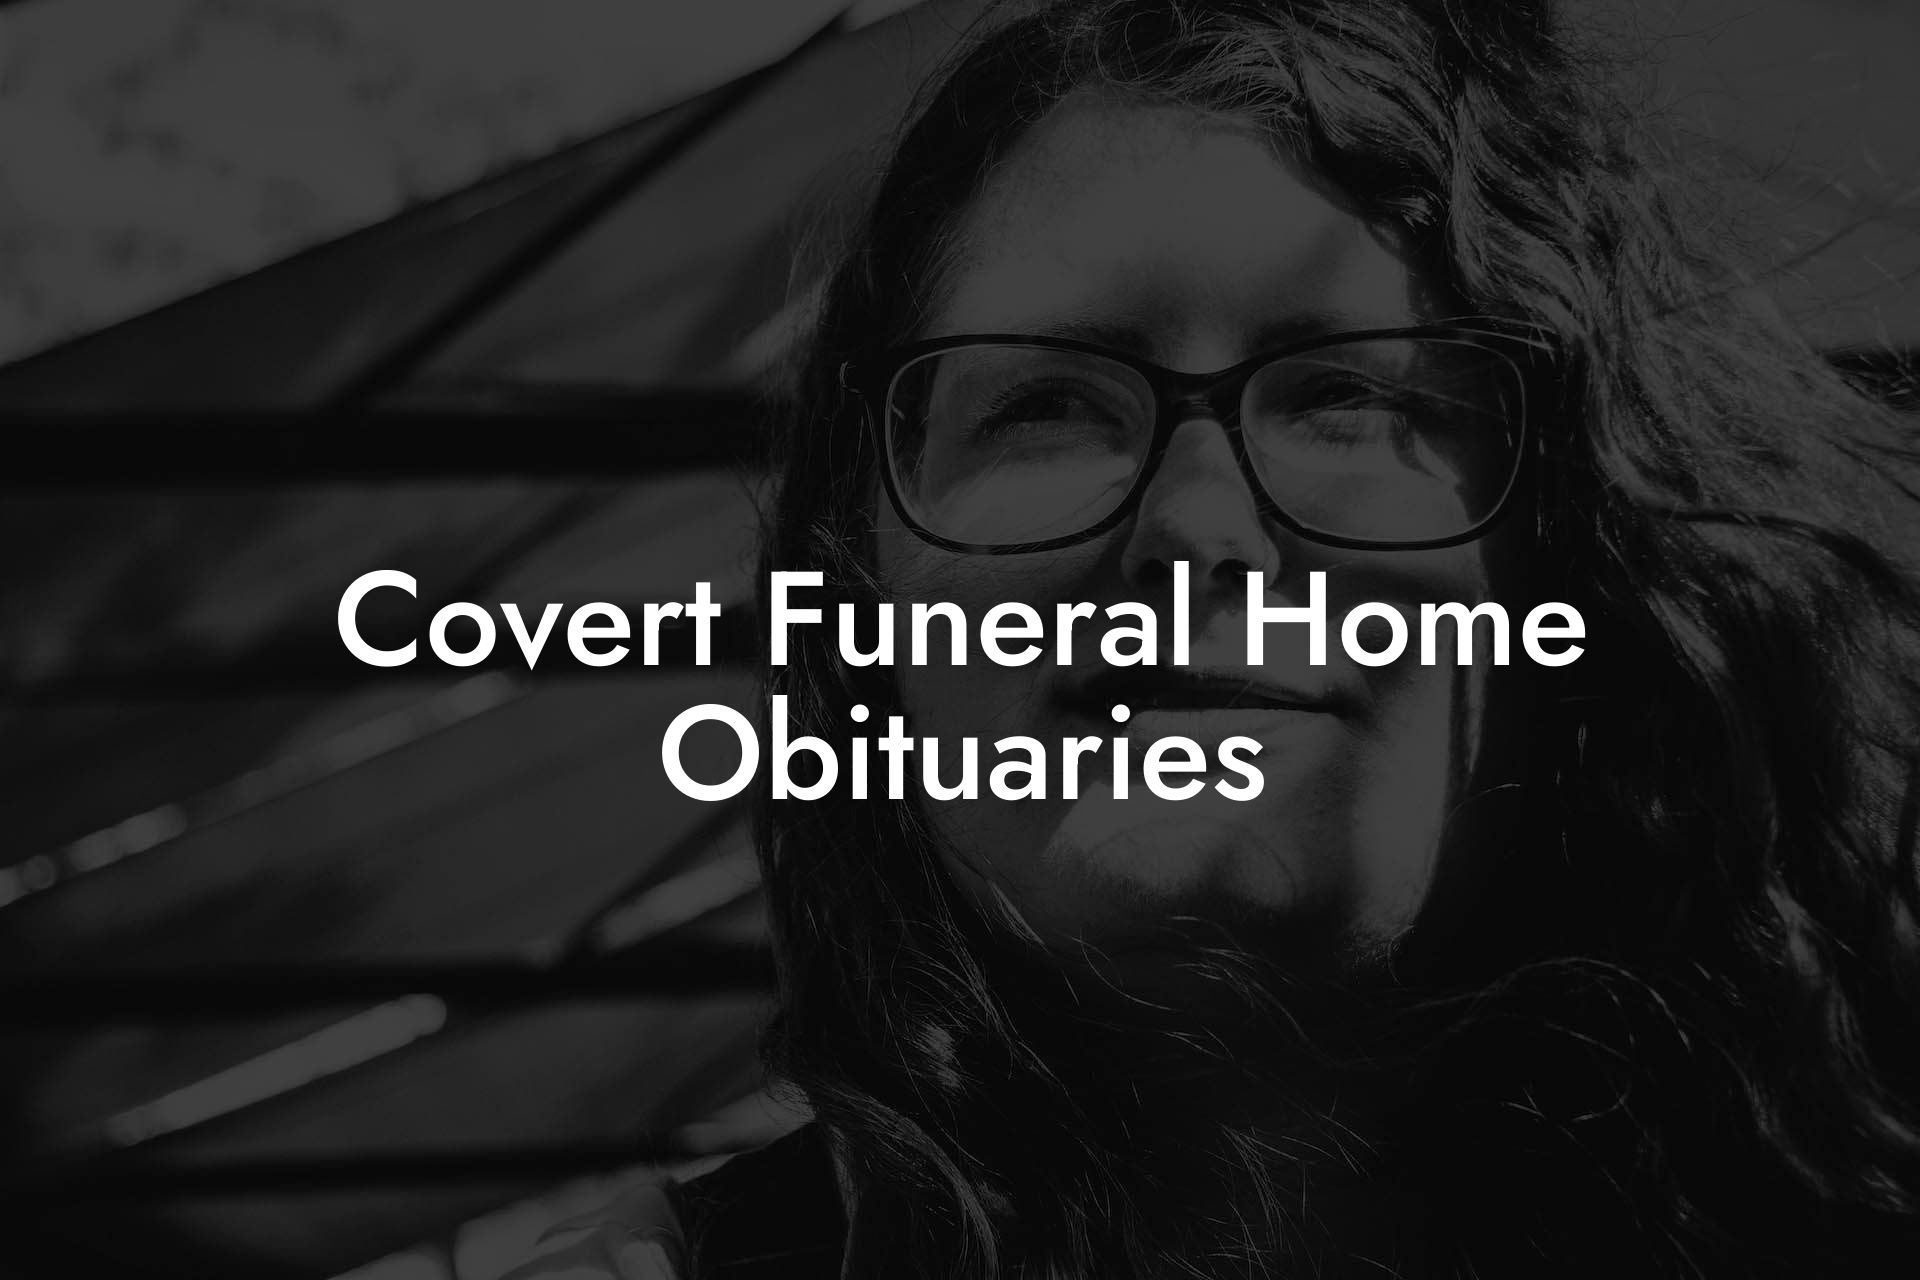 Covert Funeral Home Obituaries